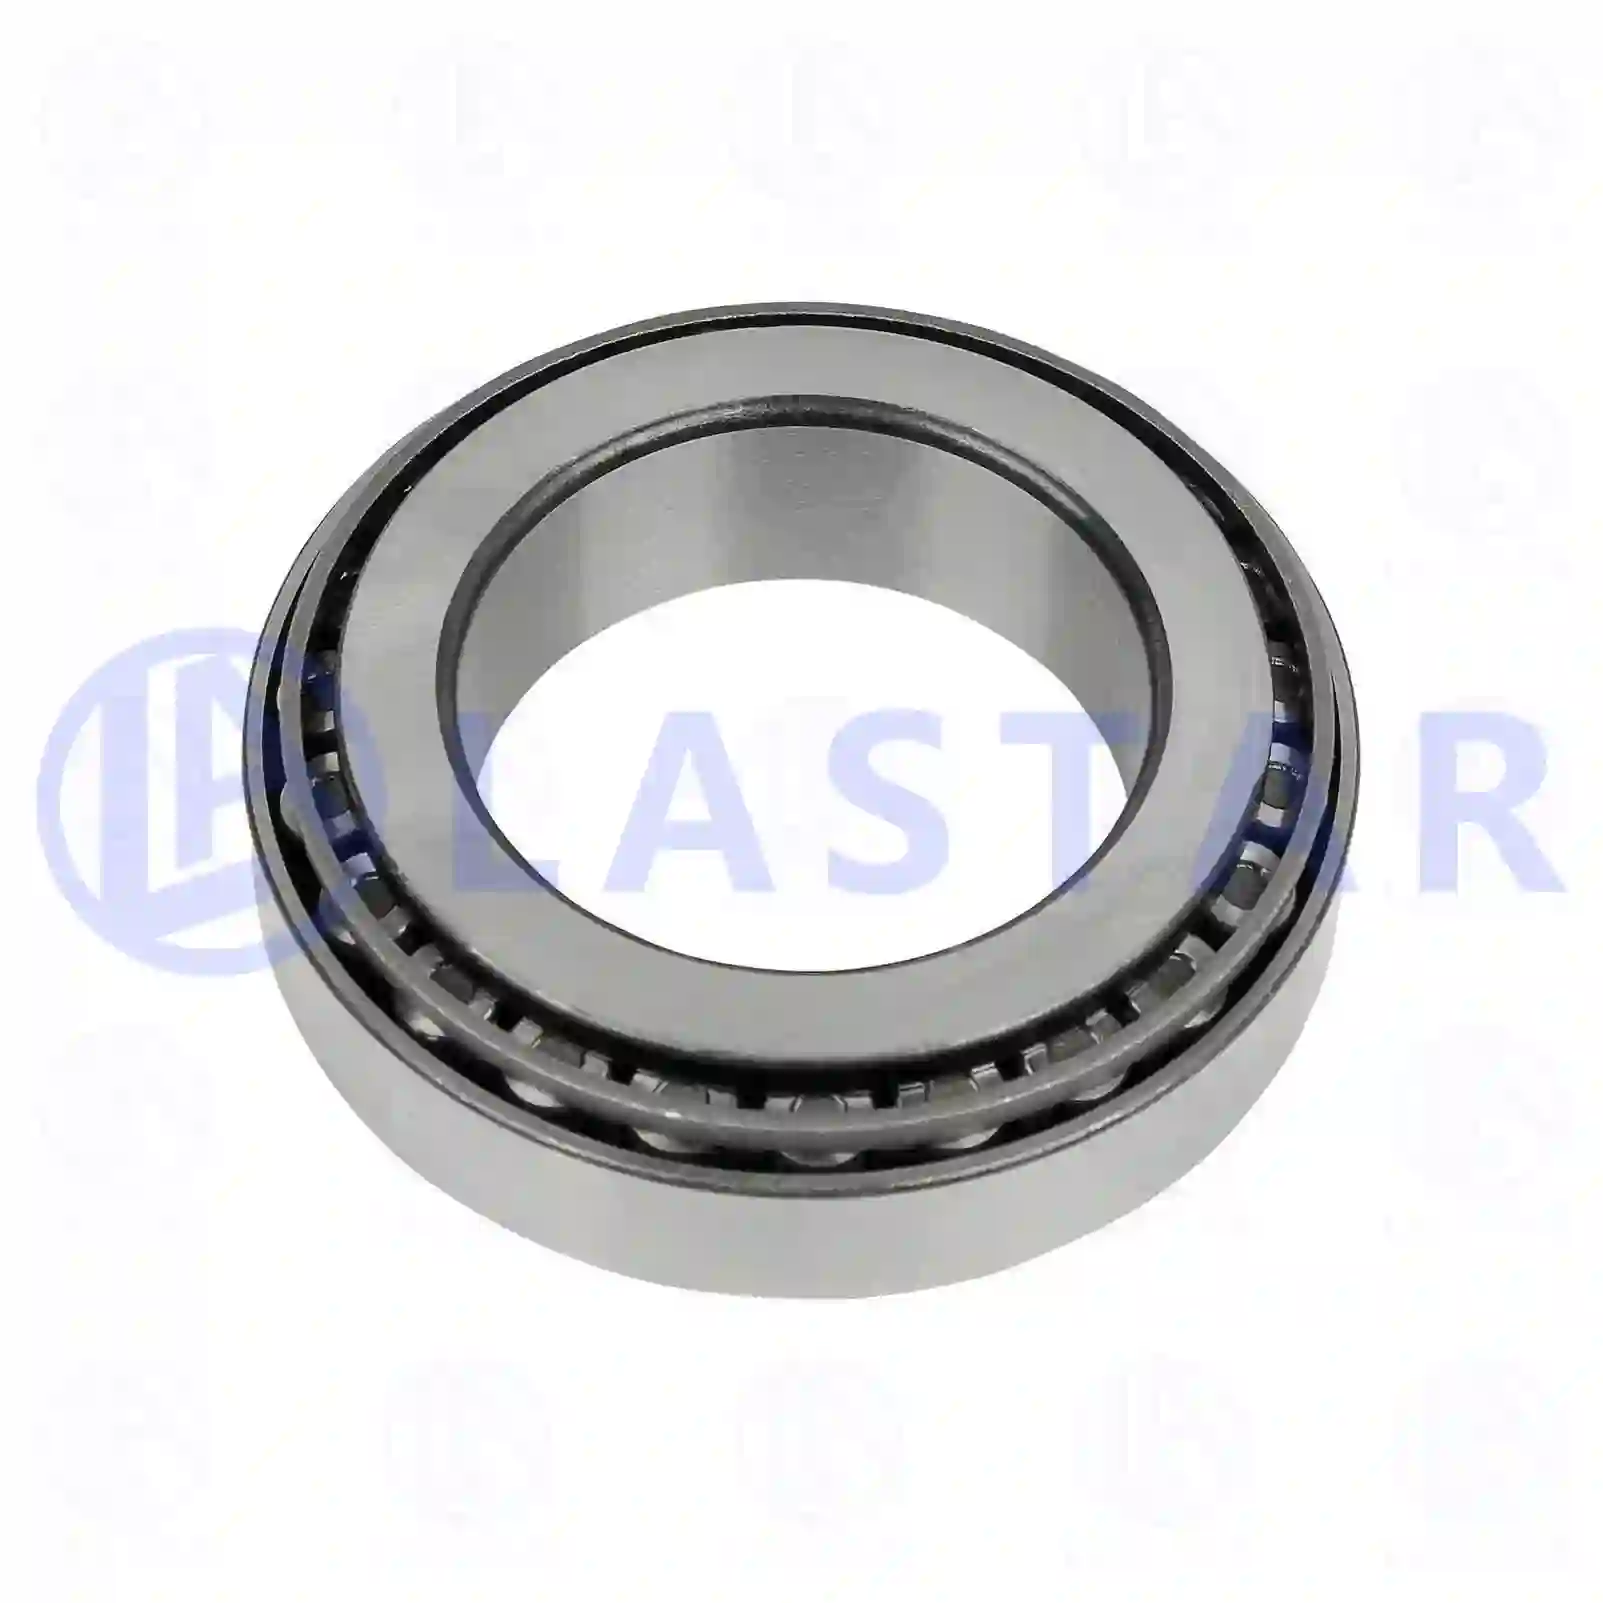 Gearbox Unit Tapered roller bearing, la no: 77732633 ,  oem no:0149811605, 0159817705, 0179815705, ZG03001-0008 Lastar Spare Part | Truck Spare Parts, Auotomotive Spare Parts